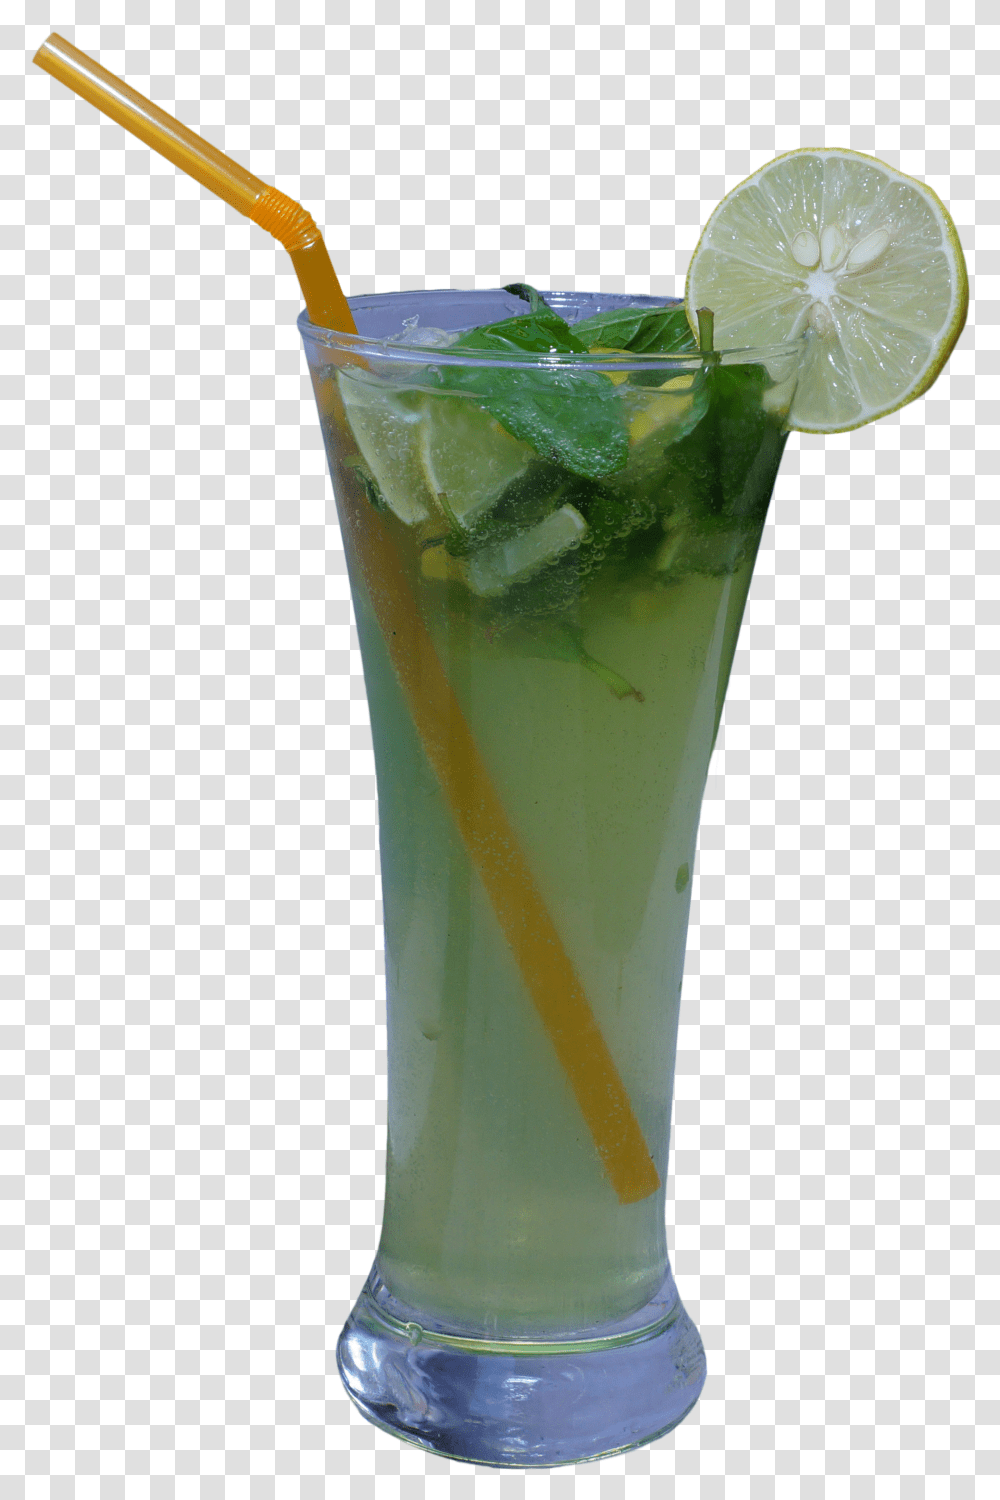 Mint And Lemon Water Glass Lemon Water In Glass, Cocktail, Alcohol, Beverage, Drink Transparent Png